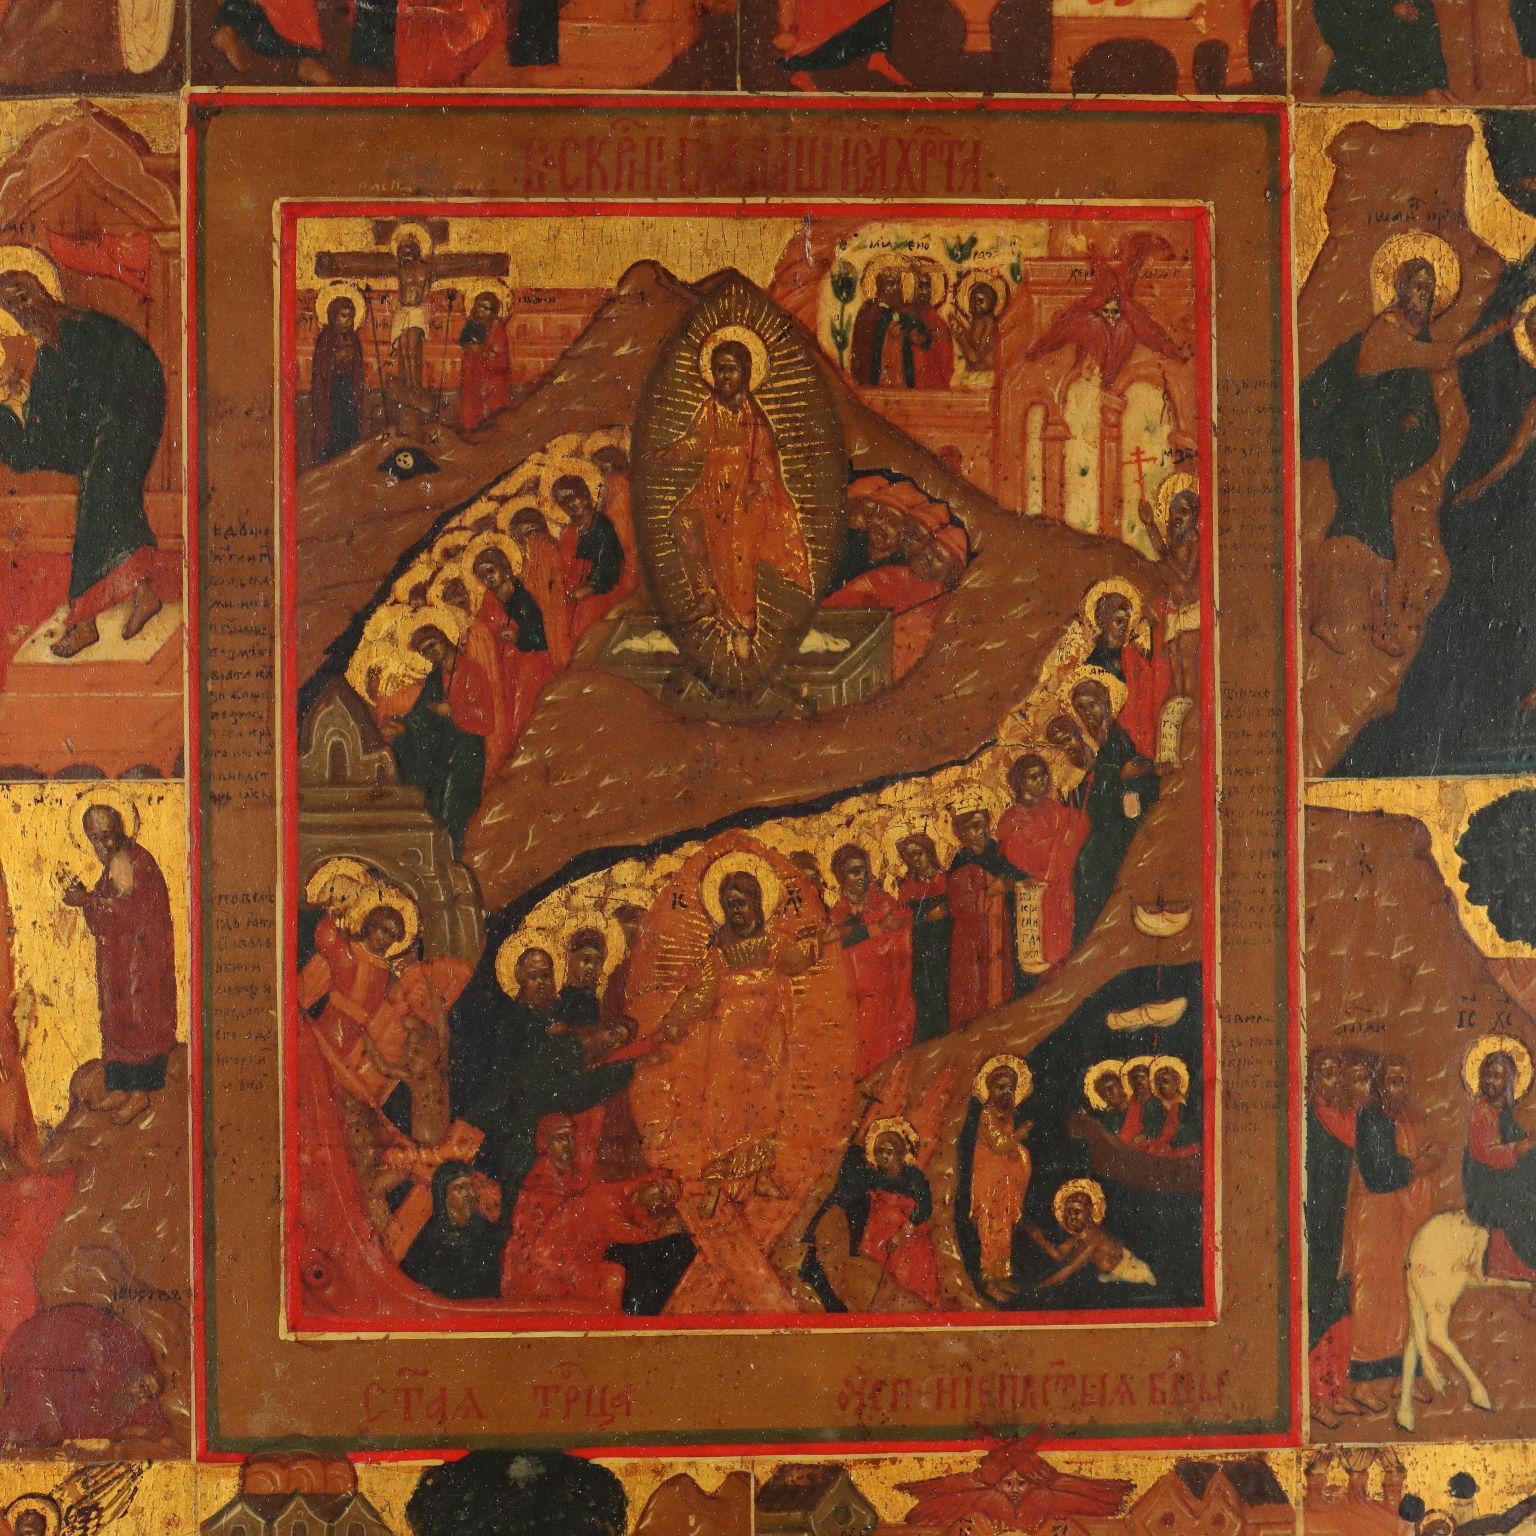 Tempera on wood. The twelve accompanying scenes retrace Gospel episodes, which start from the birth of Mary and then recount moments in the life of Jesus, which culminate in the center with the death, resurrection and Ascension of Christ. The board